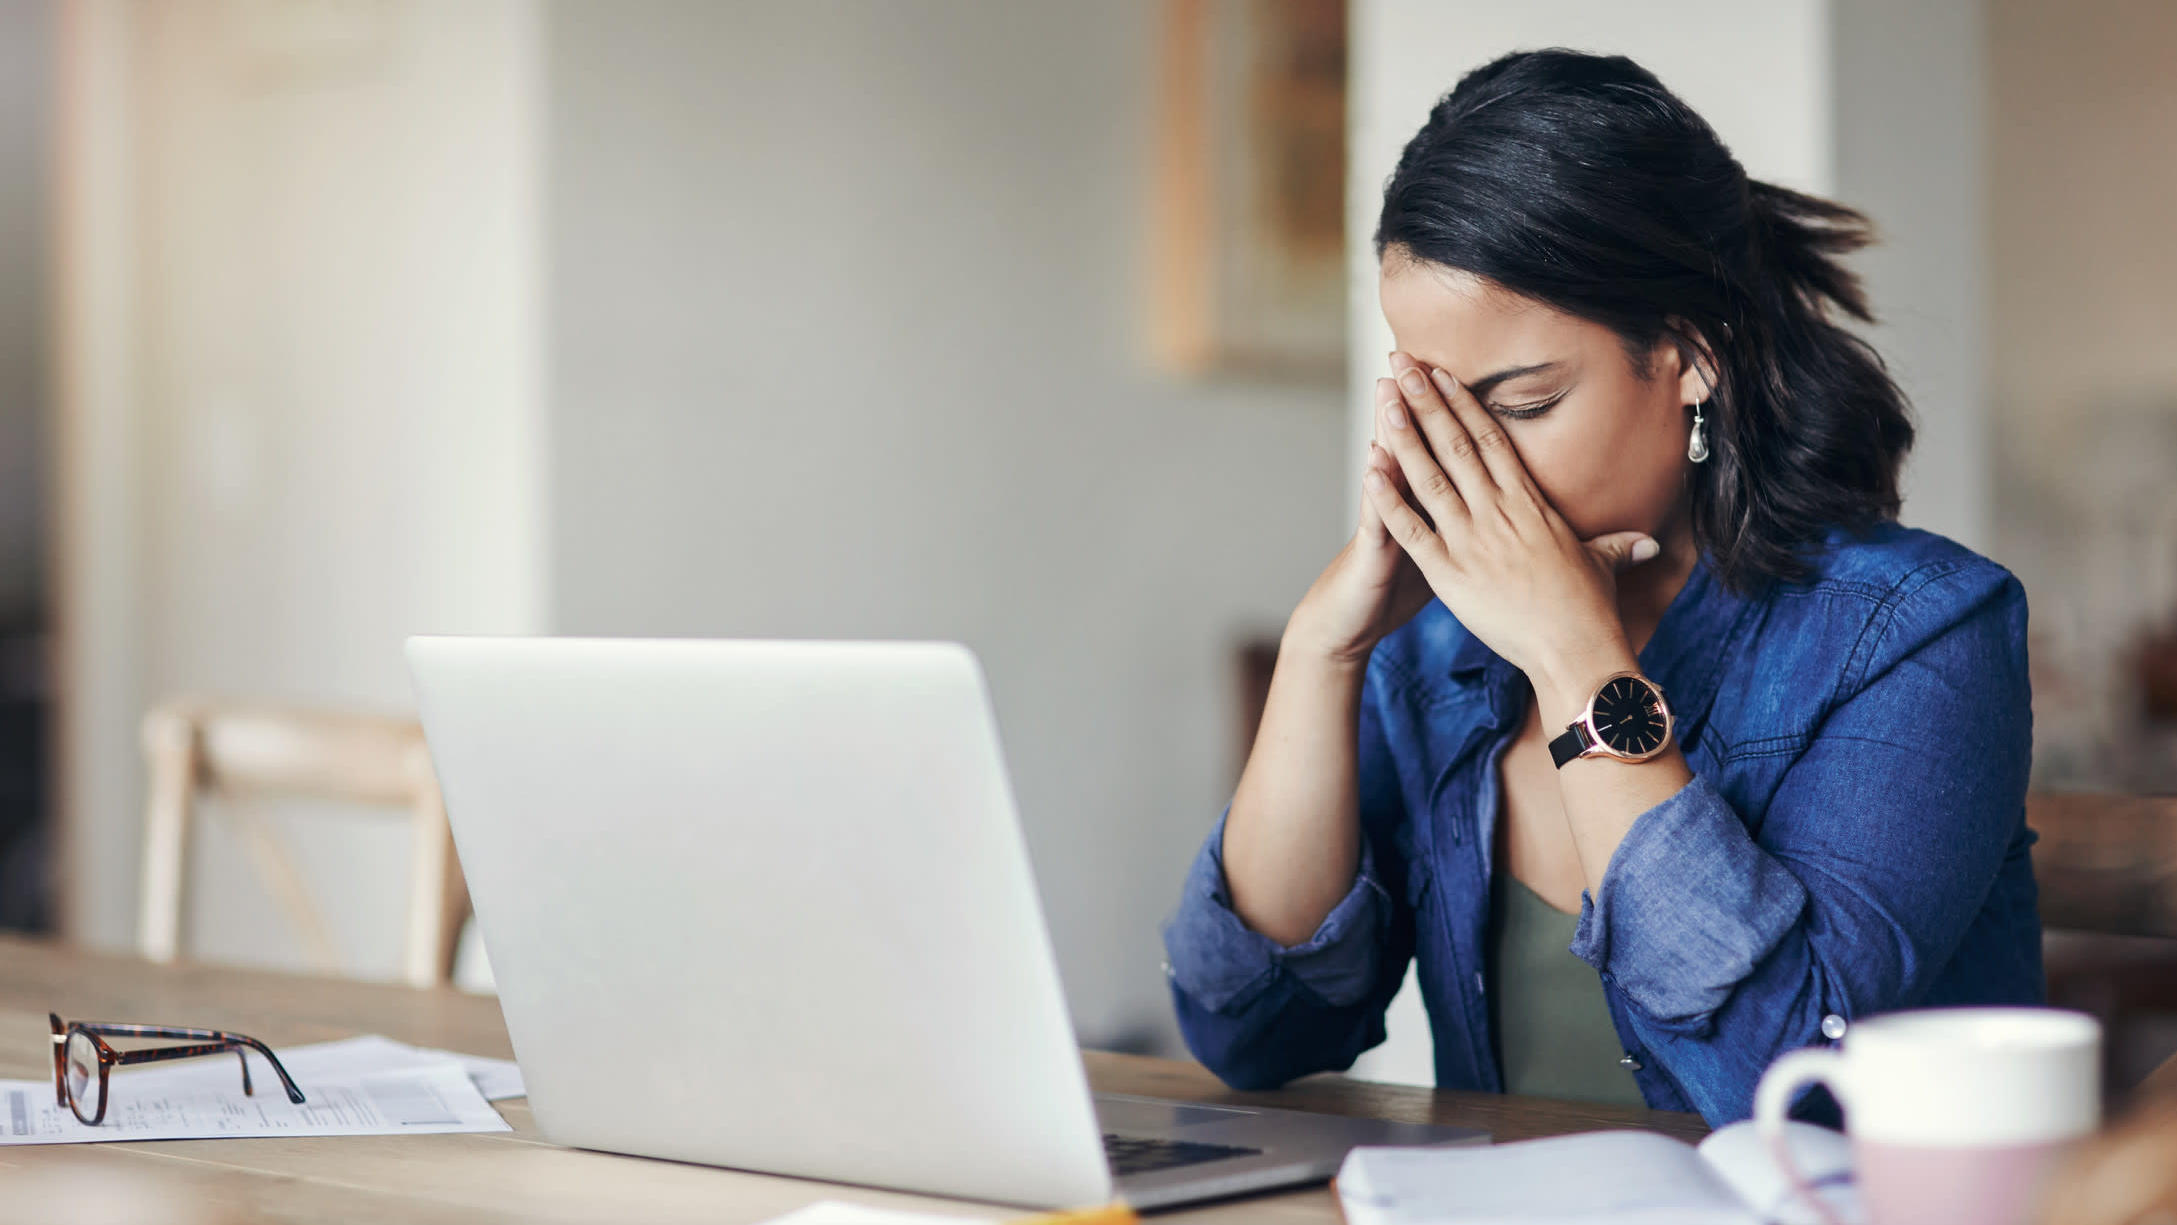 Save Your Finances by Avoiding These Common Mistakes